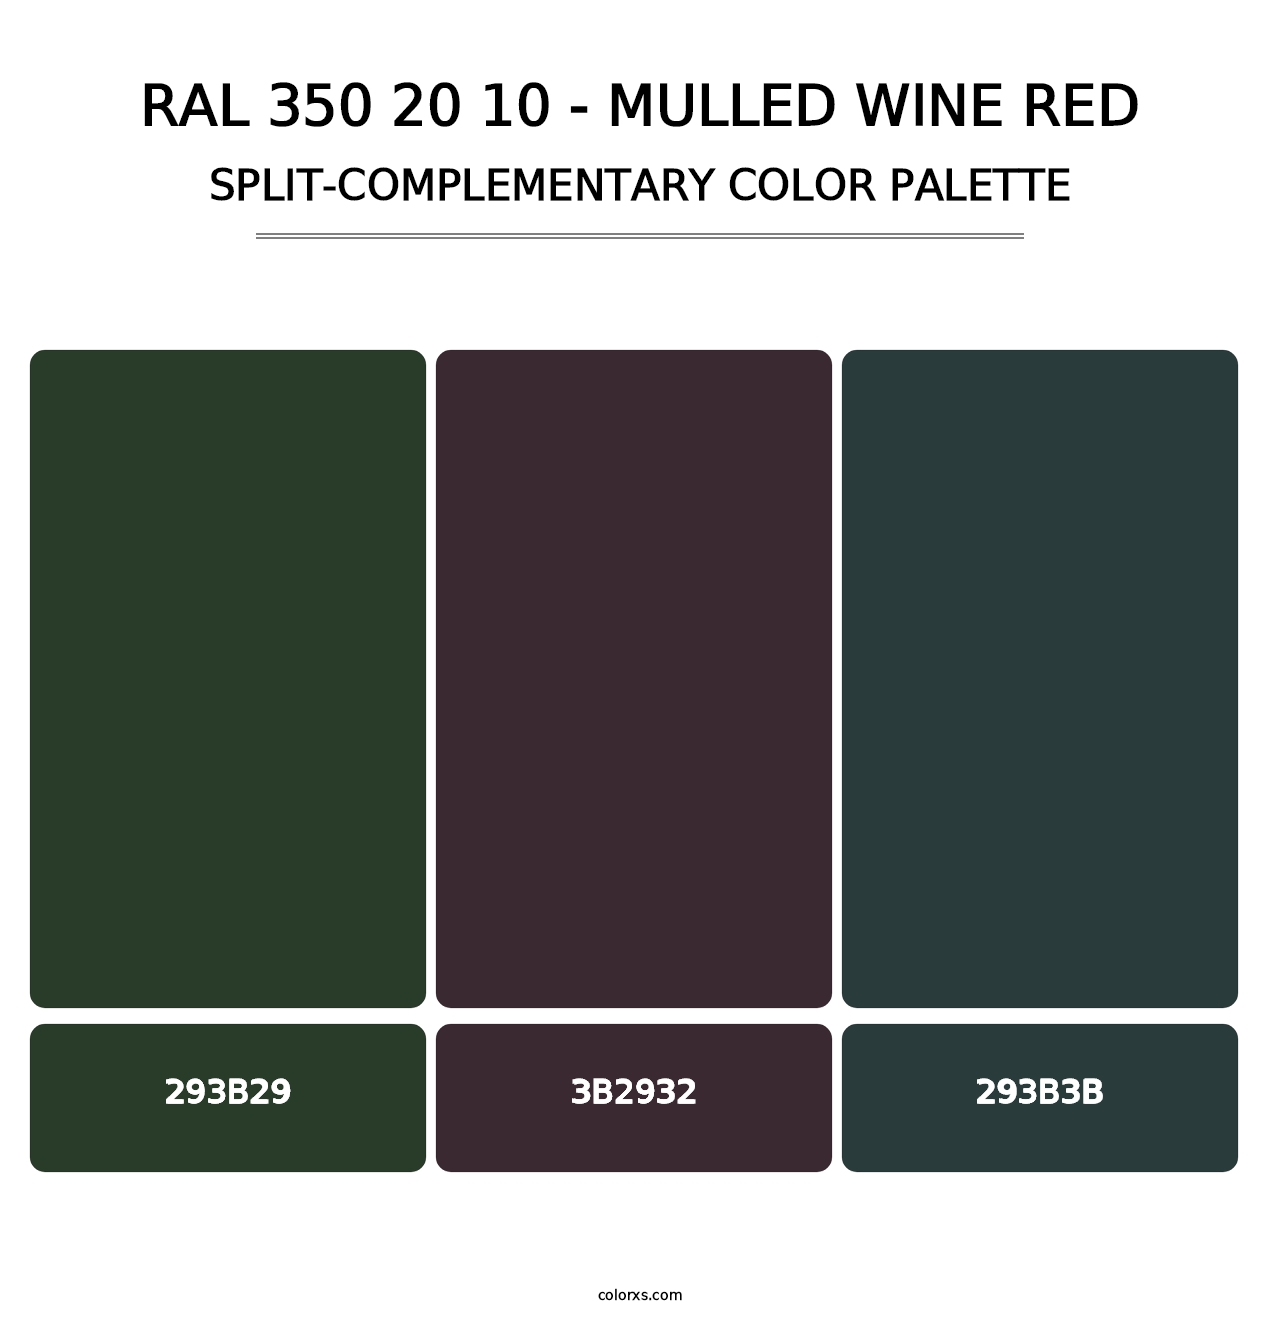 RAL 350 20 10 - Mulled Wine Red - Split-Complementary Color Palette